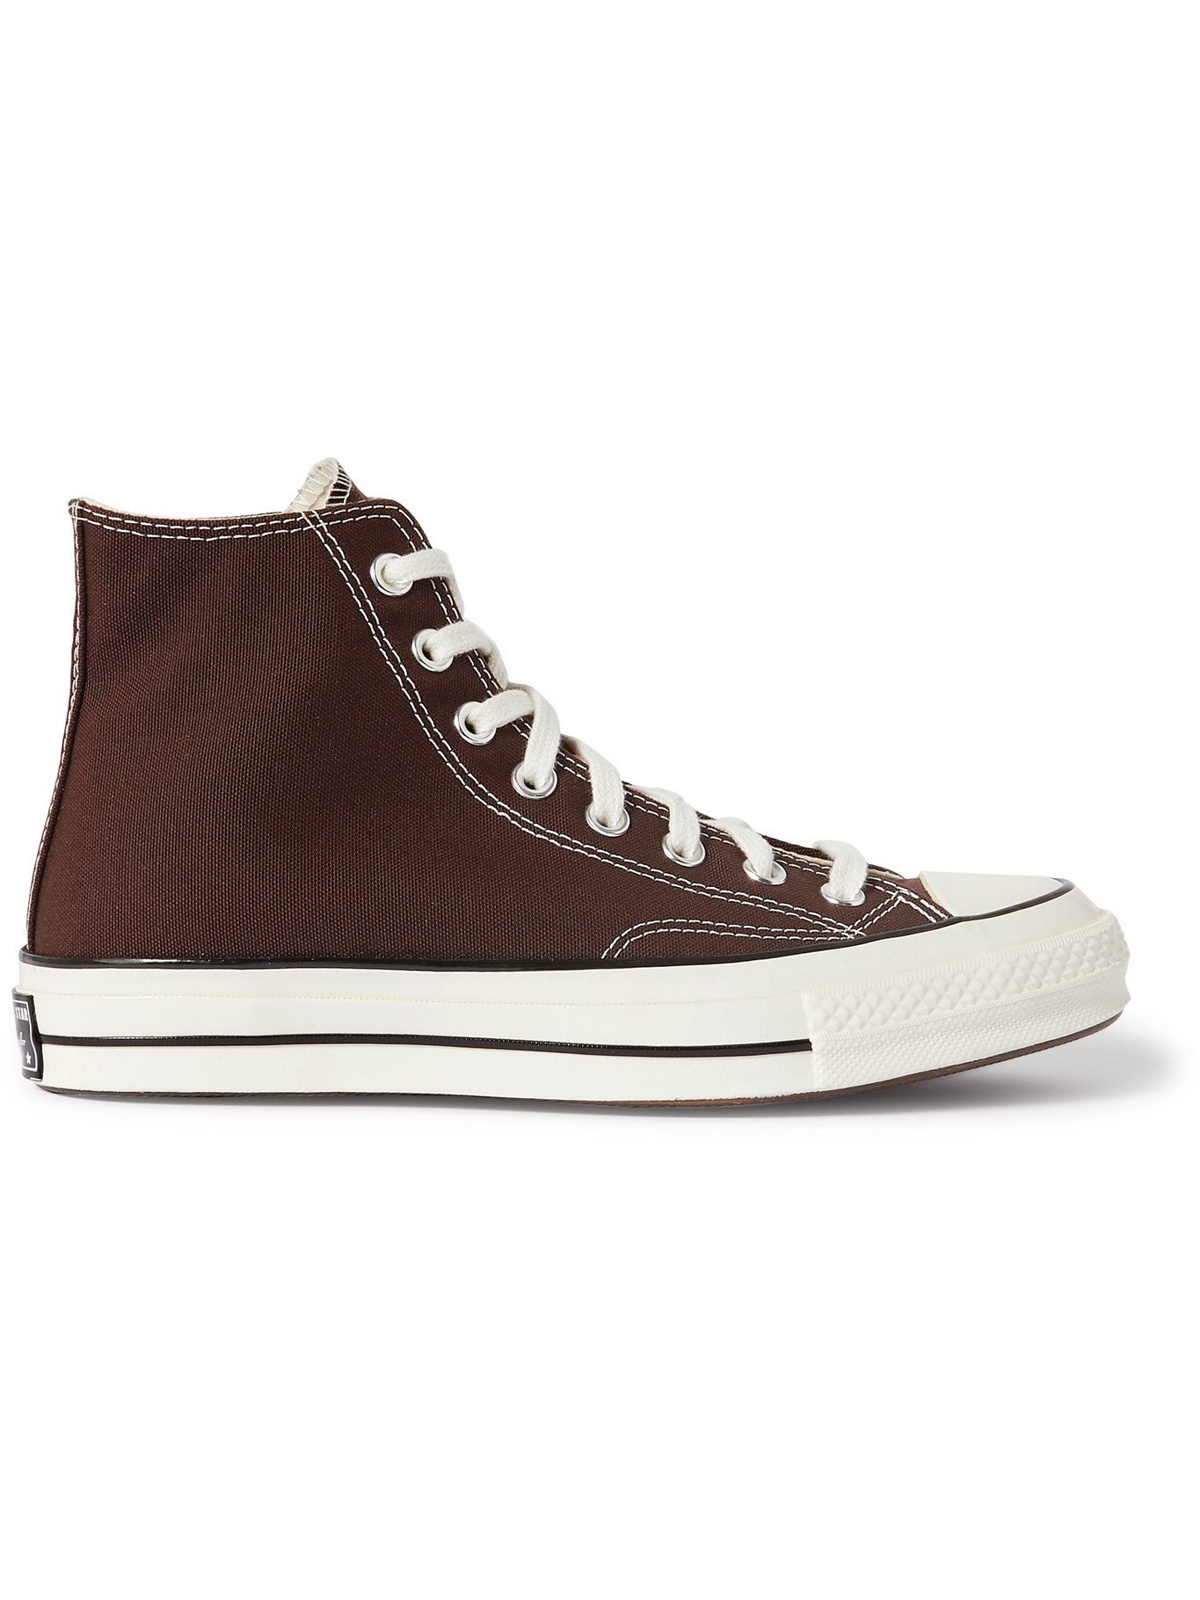 CONVERSE - Chuck Taylor All Star 70 Canvas High-Top Sneakers - Brown ...